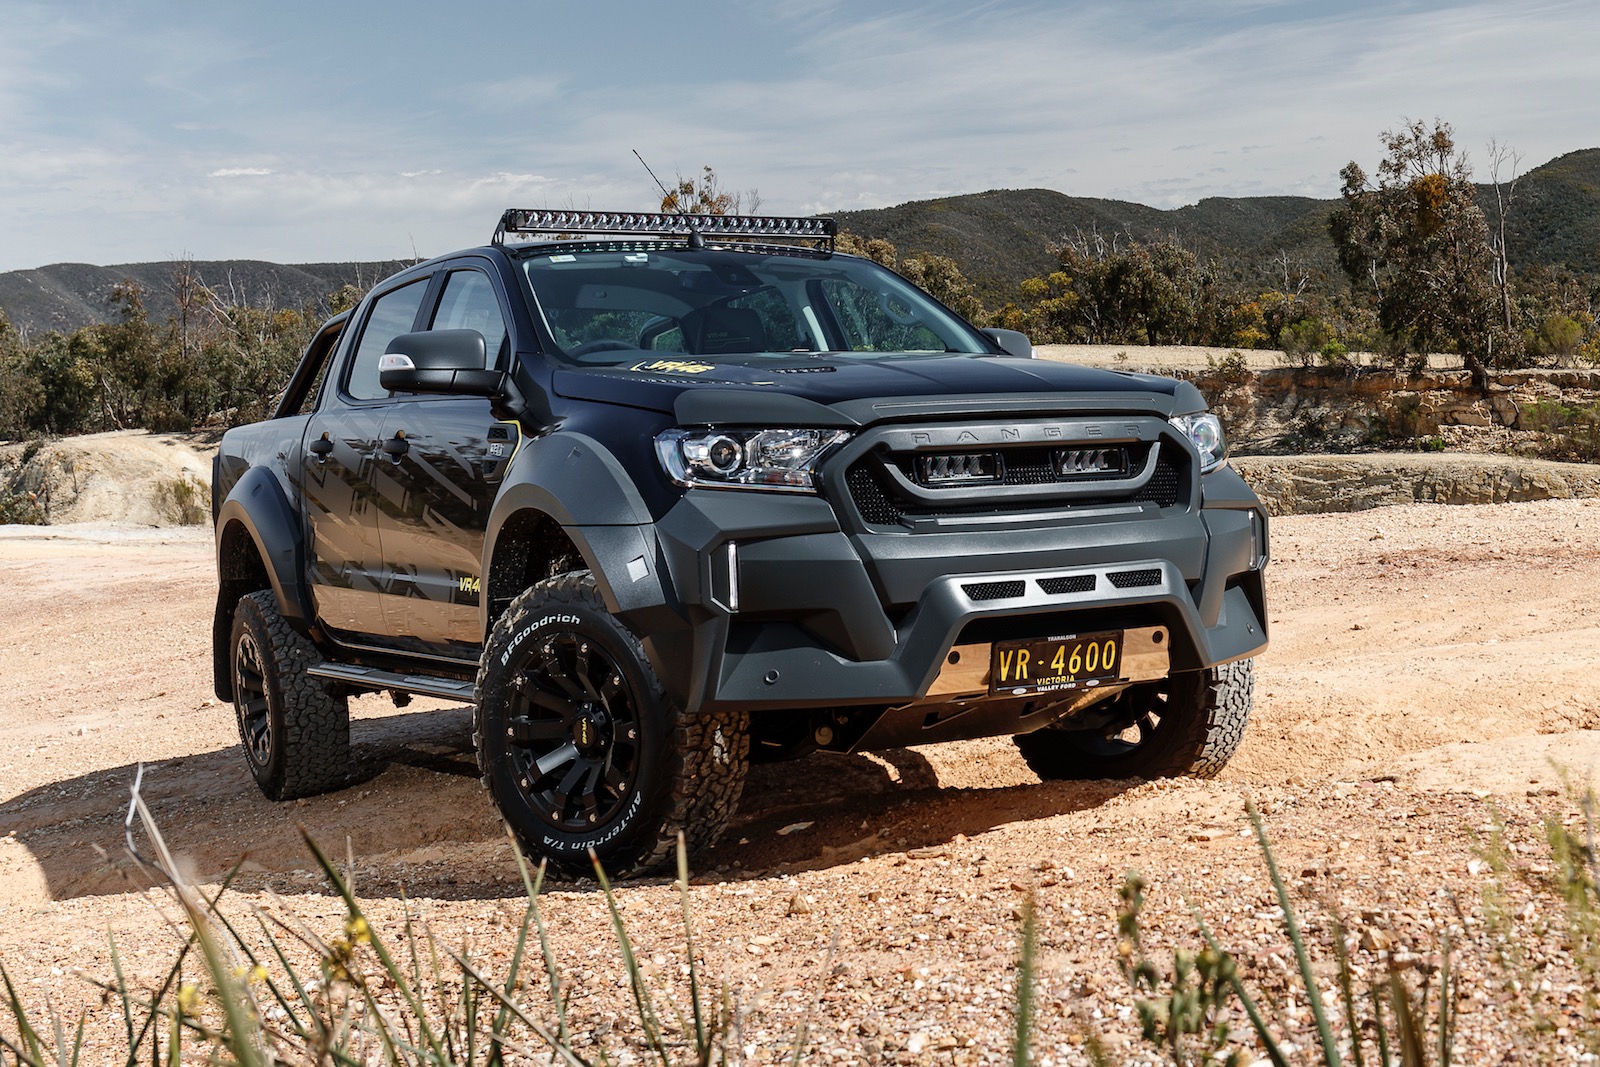 MS-RT Ford Ranger VR-46 limited edition kit announced